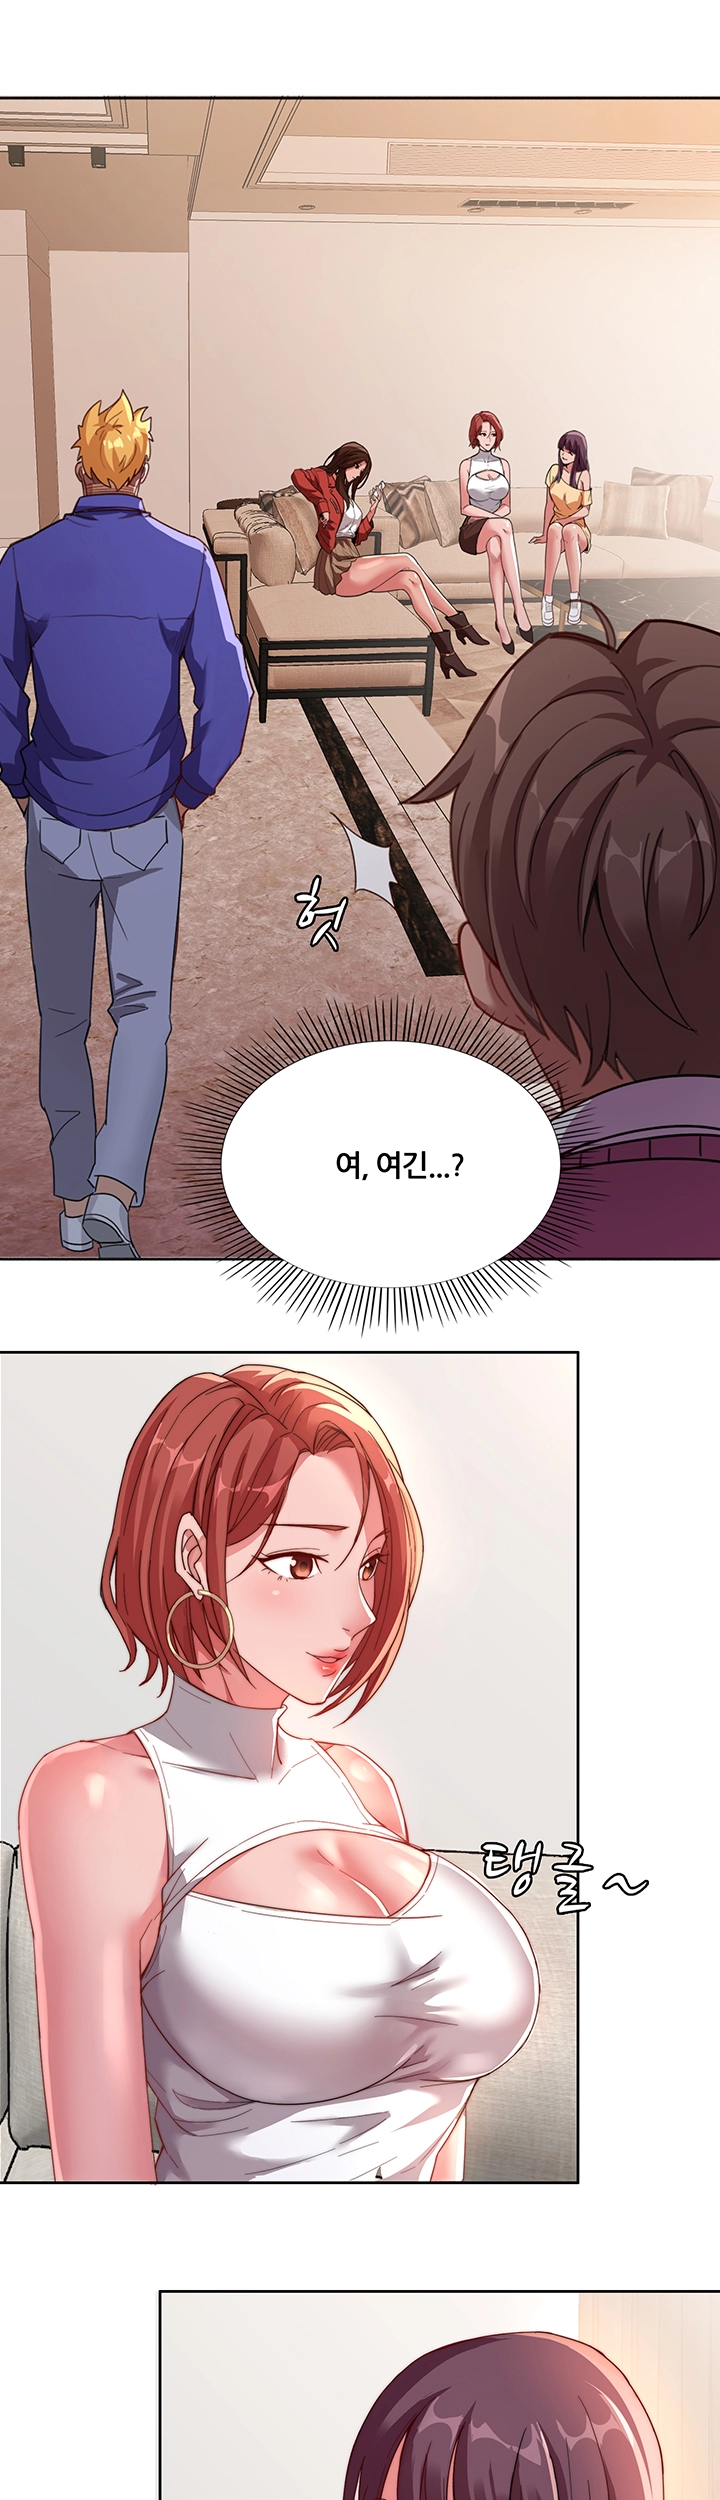 Lover Exchange Raw - Chapter 5 Page 46